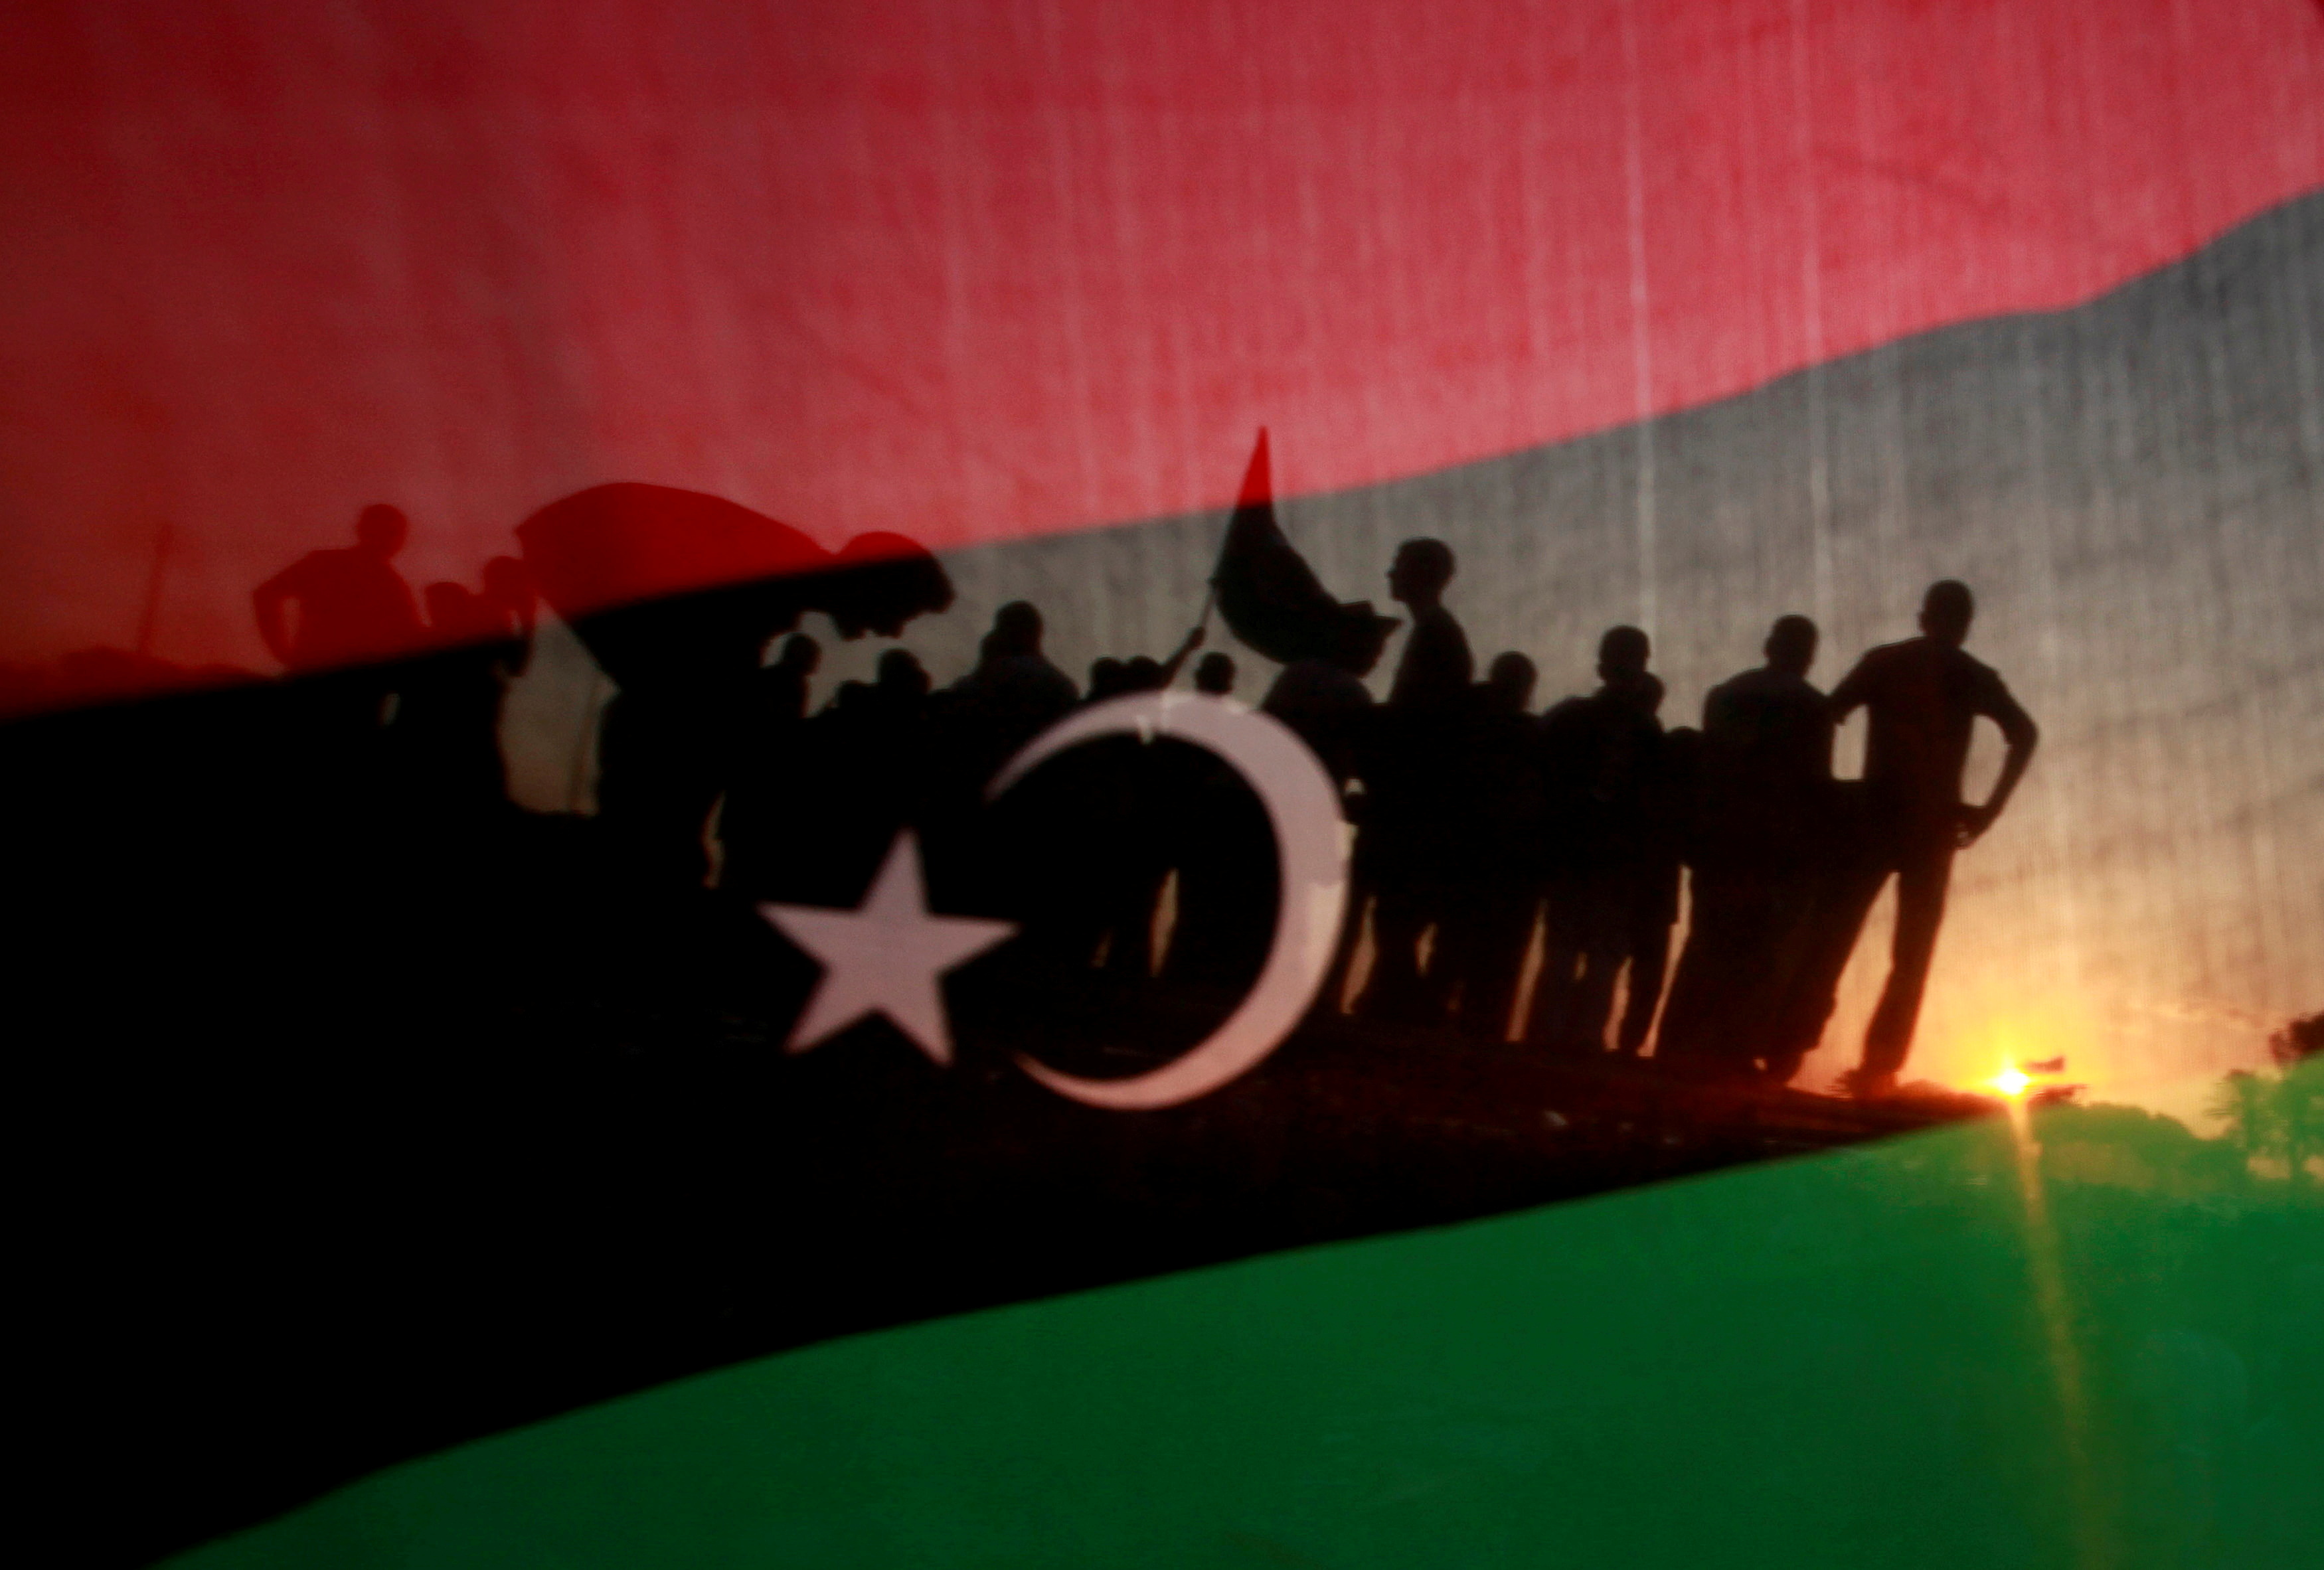 Libyans are seen through a Kingdom of Libya flag during a celebration rally in front of the residence of Muammar Gaddafi at the Bab al-Aziziyah complex in Tripoli September 13, 2011. REUTERS/Suhaib Salem/File Photo